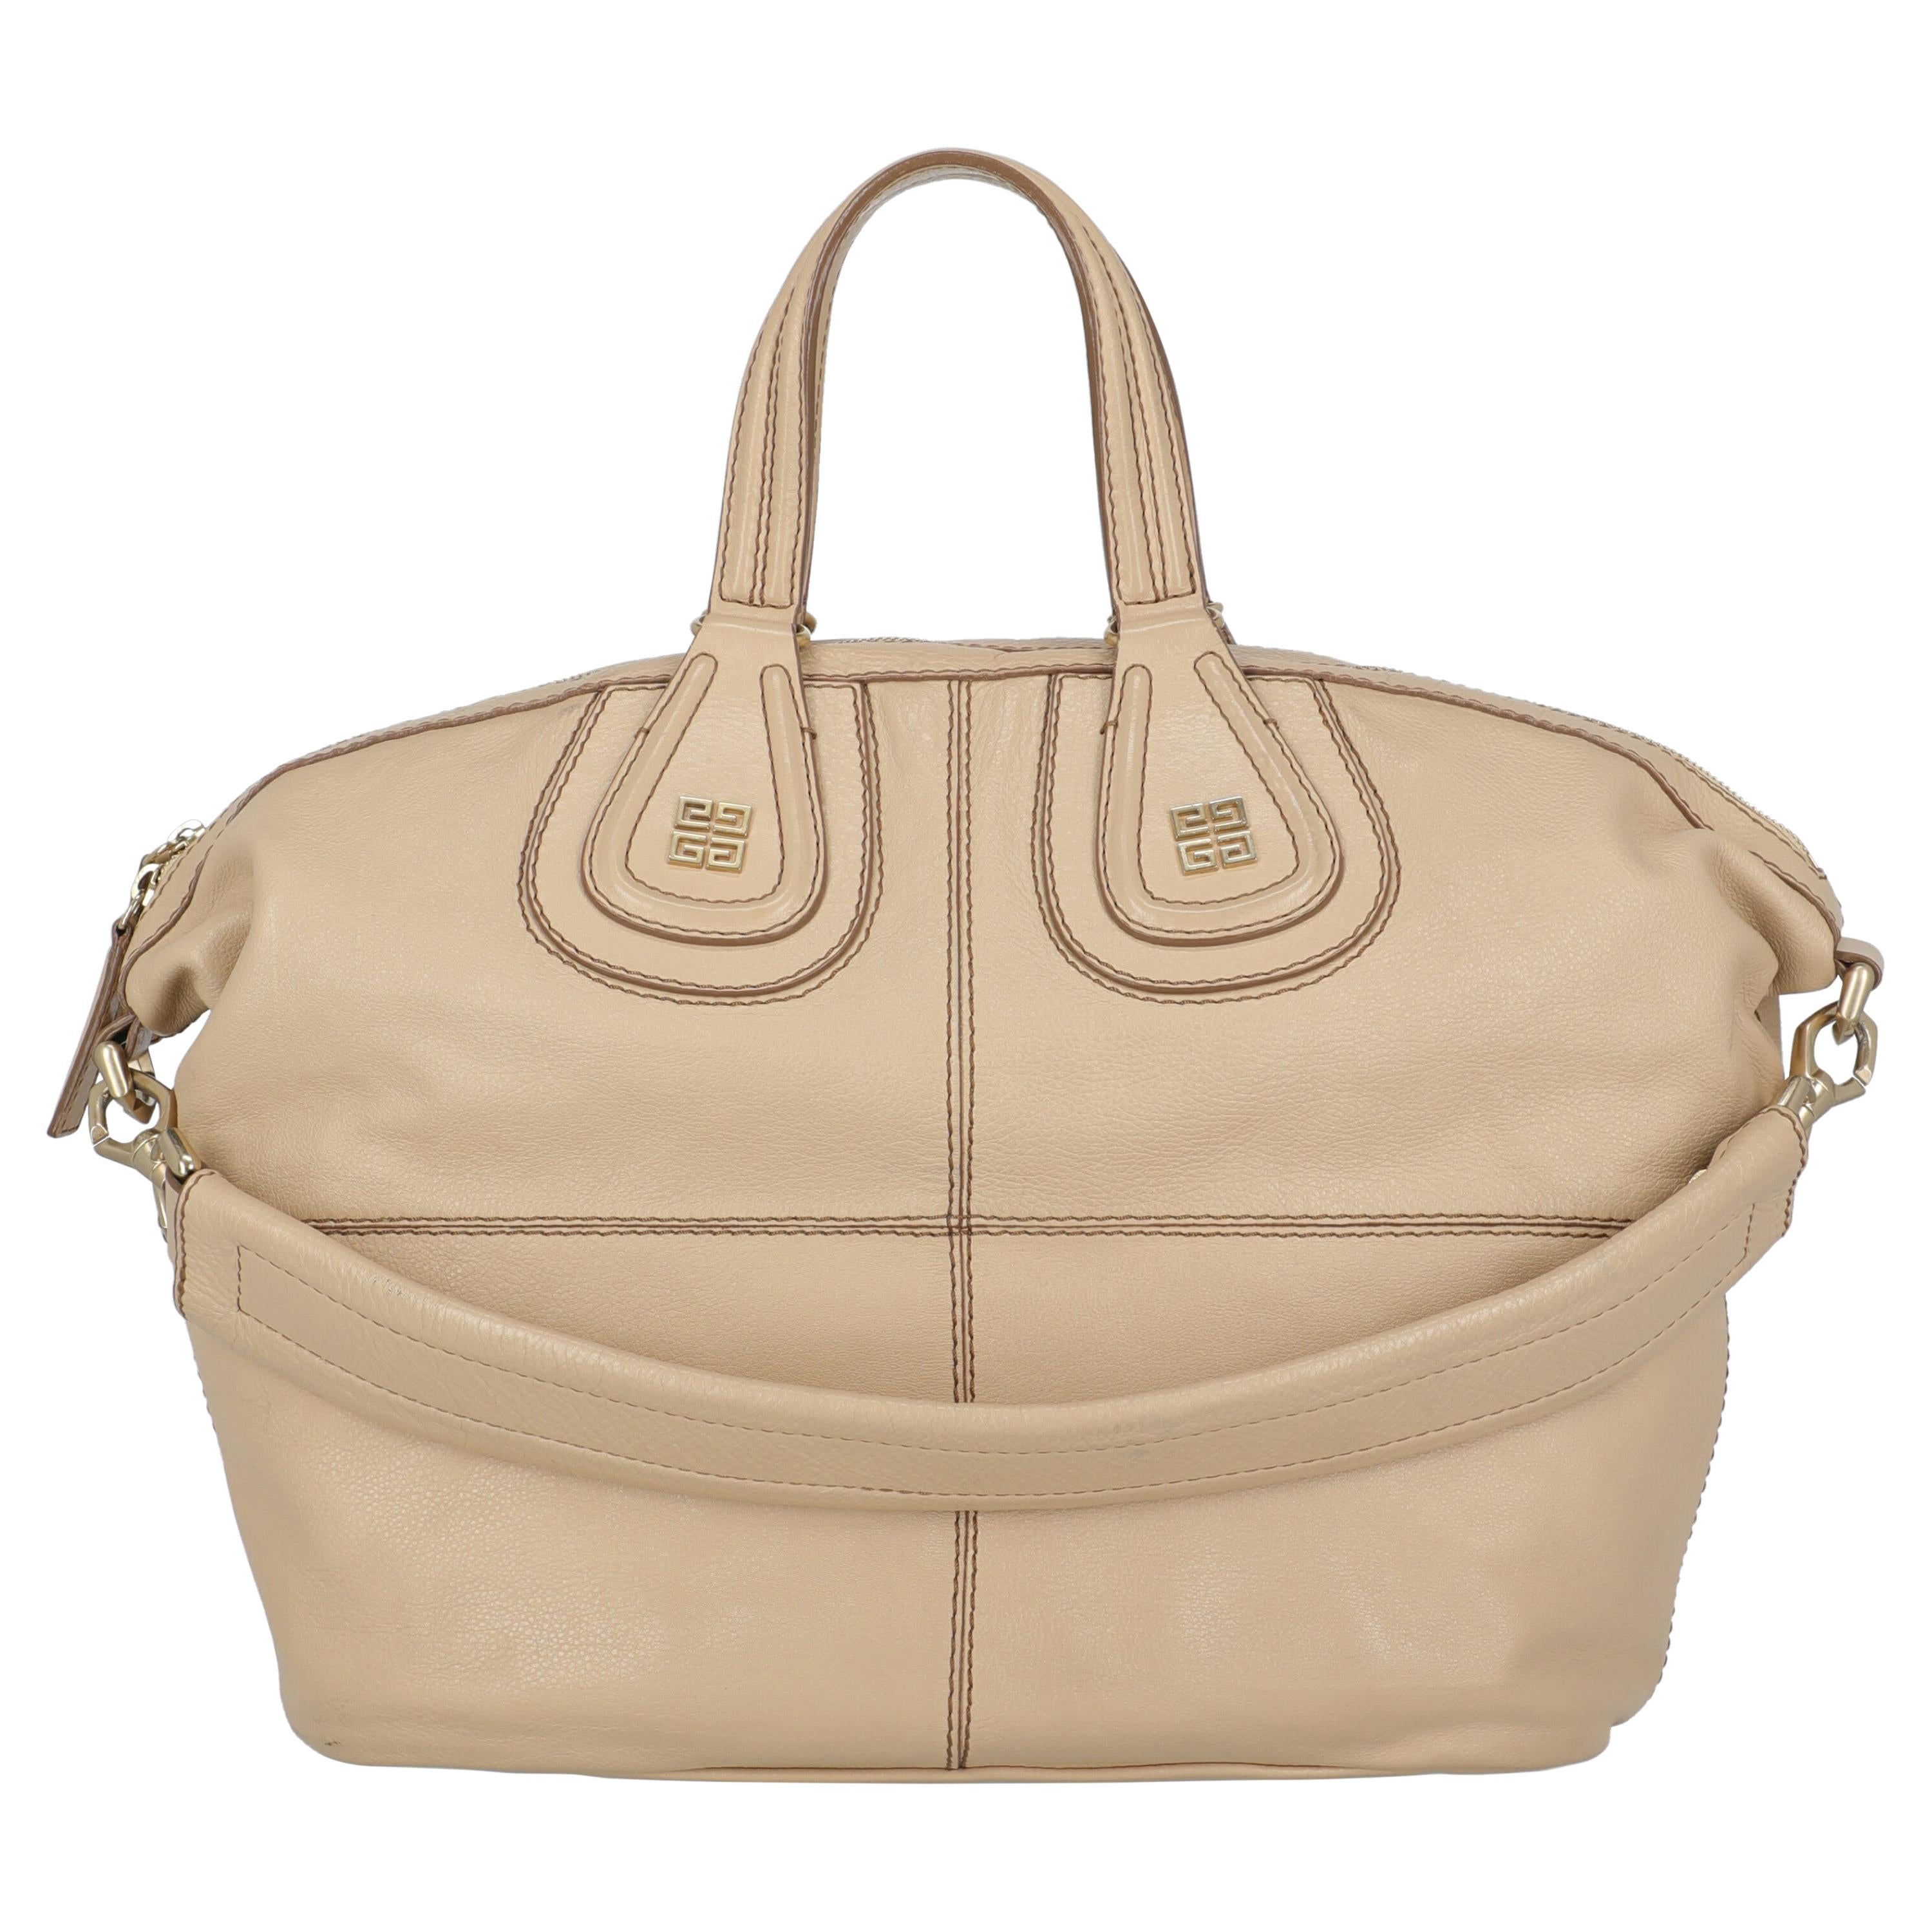 Givenchy Women  Handbags  Nightingale Beige Leather For Sale